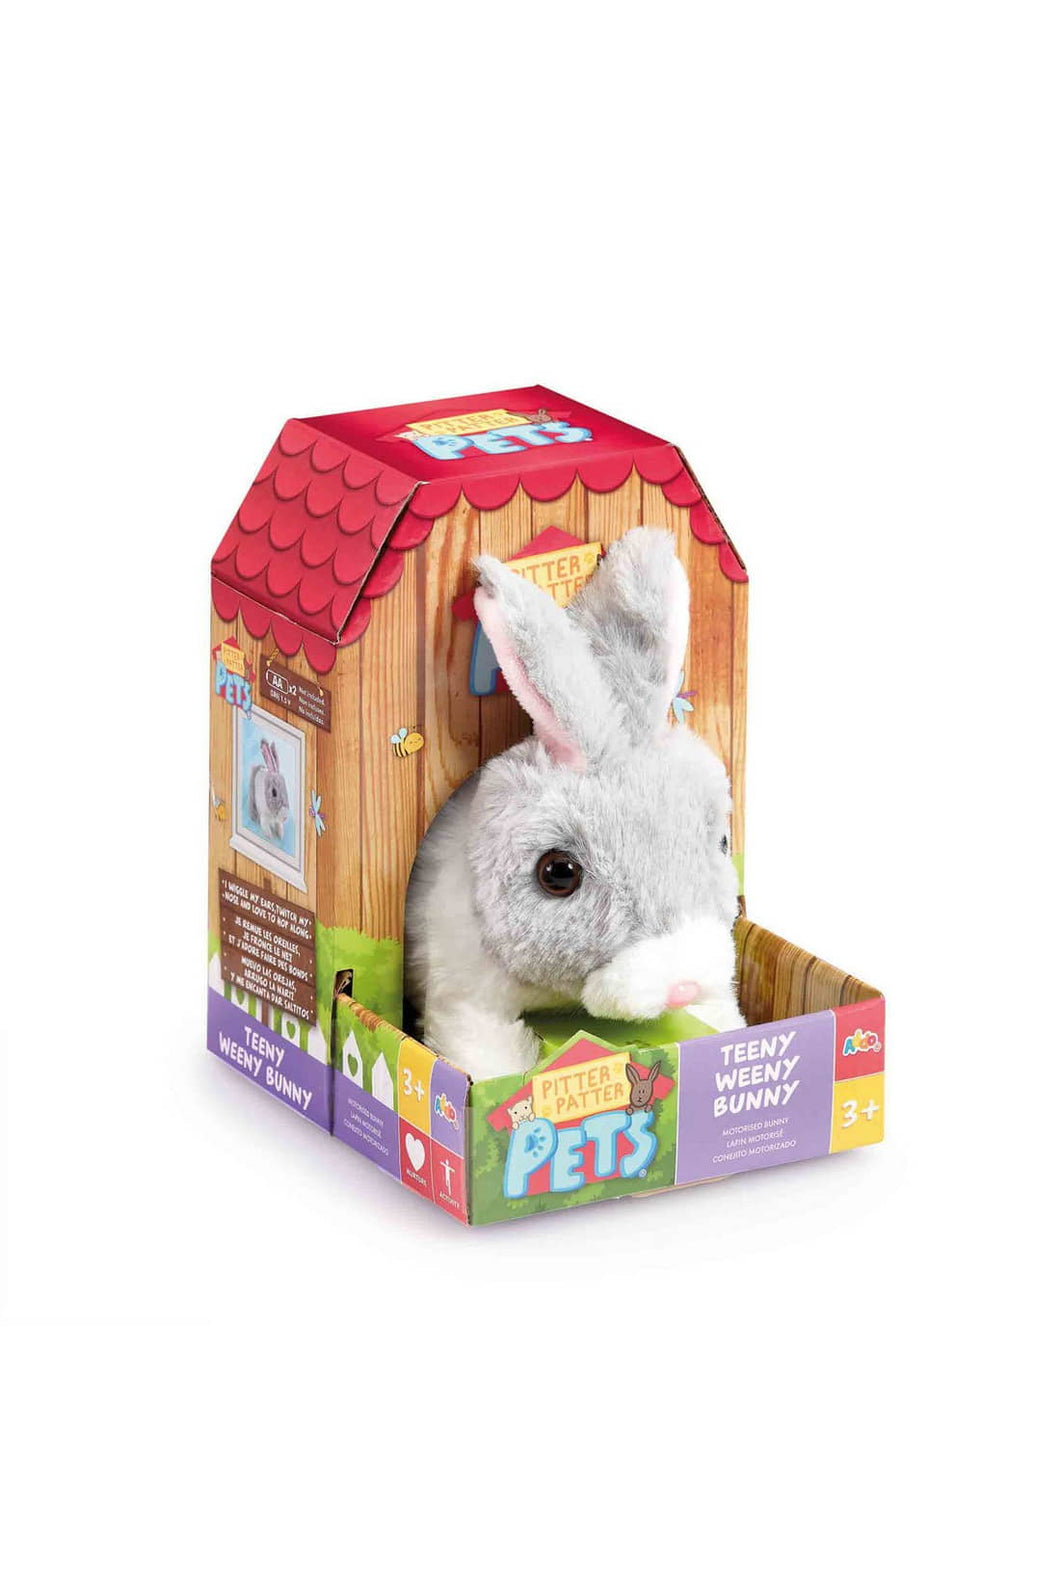 Addo Pitter Patter Pets Teeny Weeny Bunny - Grey Electronic Pet